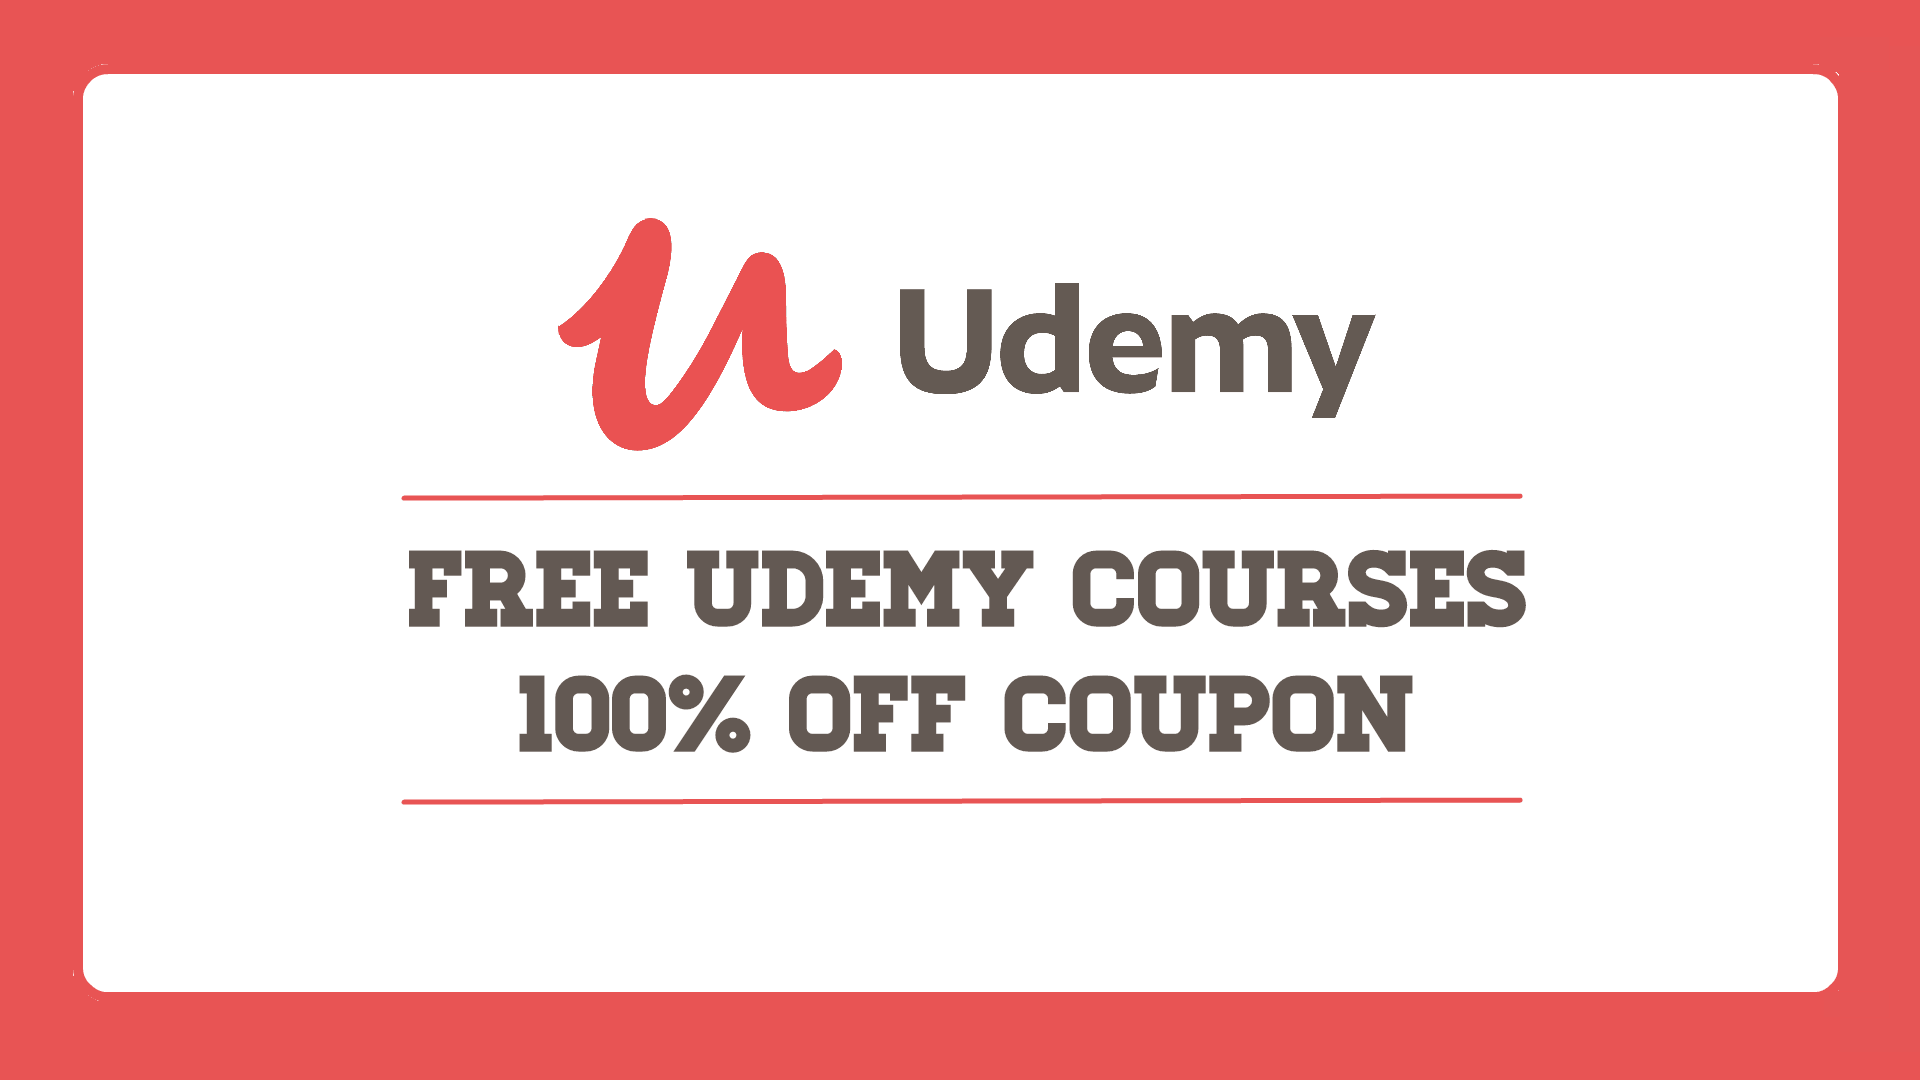 100% OFF Udemy Coupon Code 2020 - ALL Fresh Coupons Daily Update